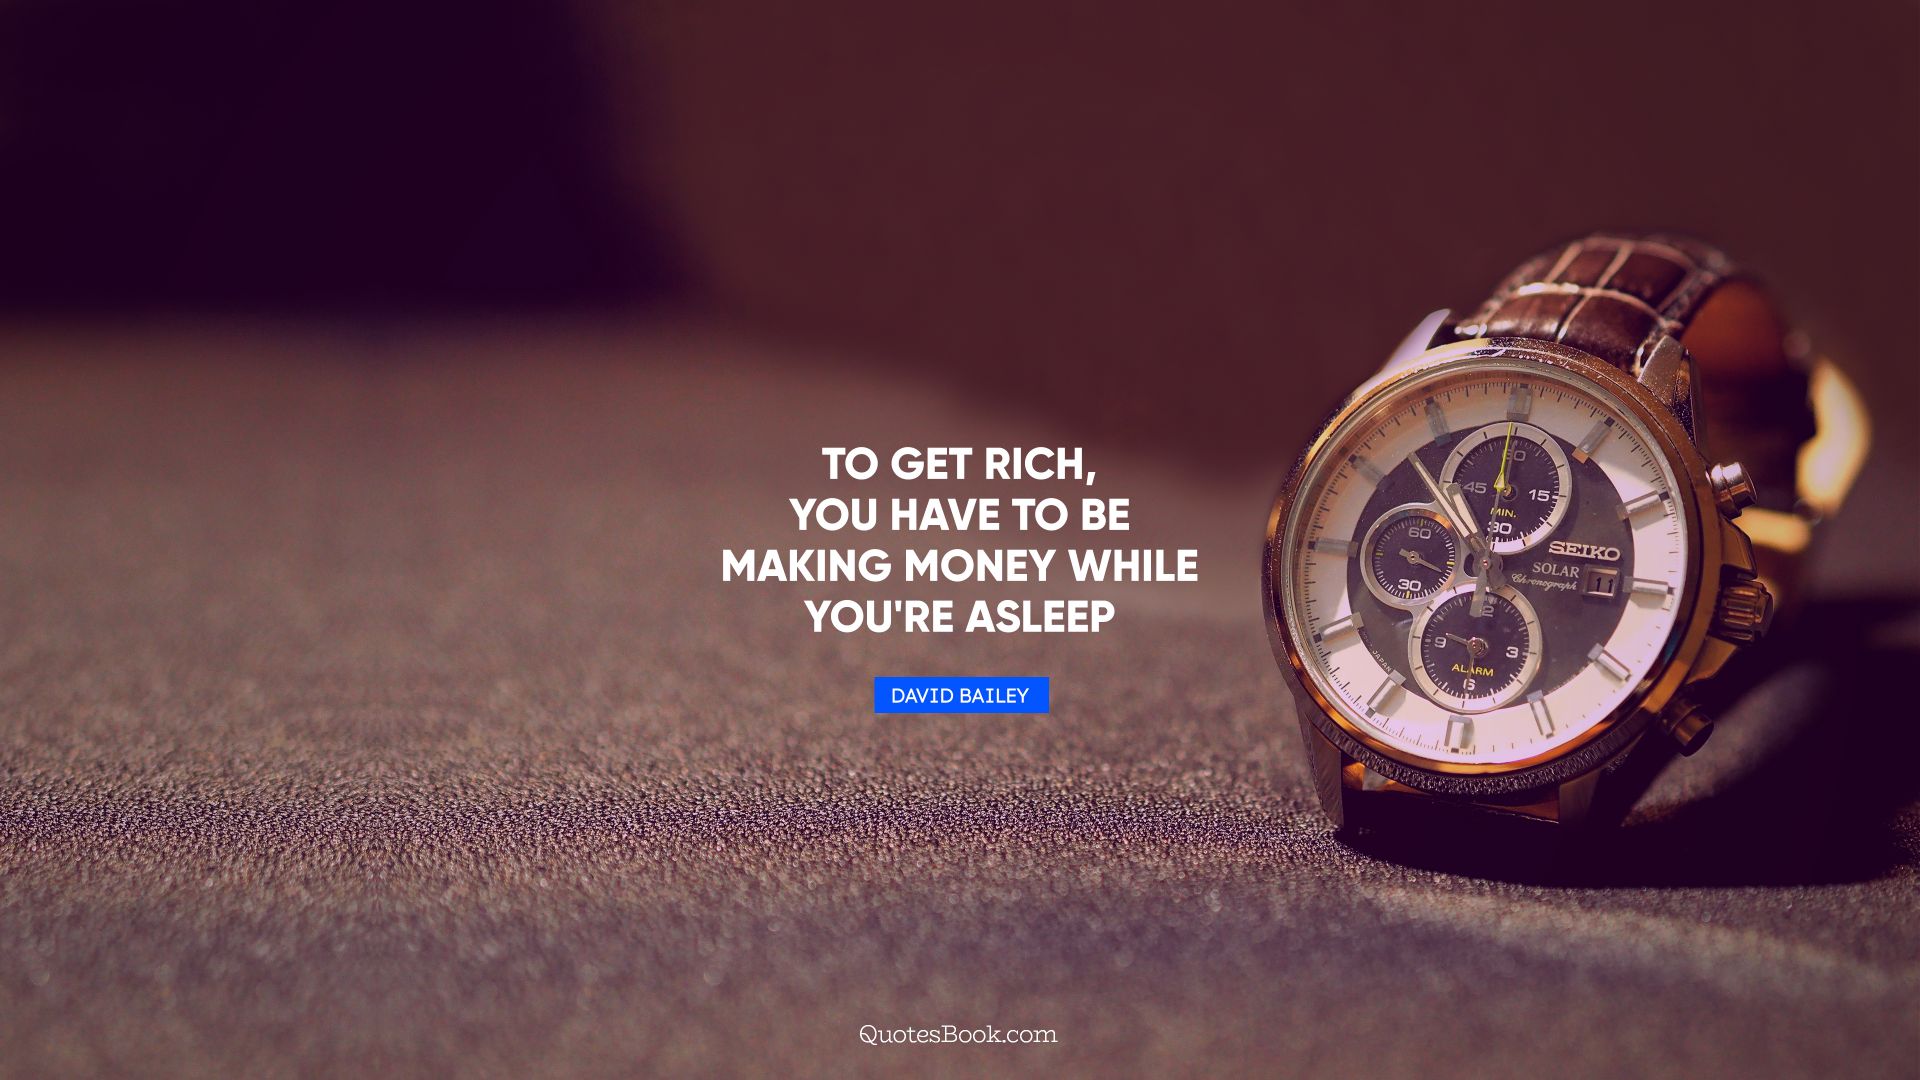 To get rich, you have to be making money while you're asleep. - Quote by David Bailey